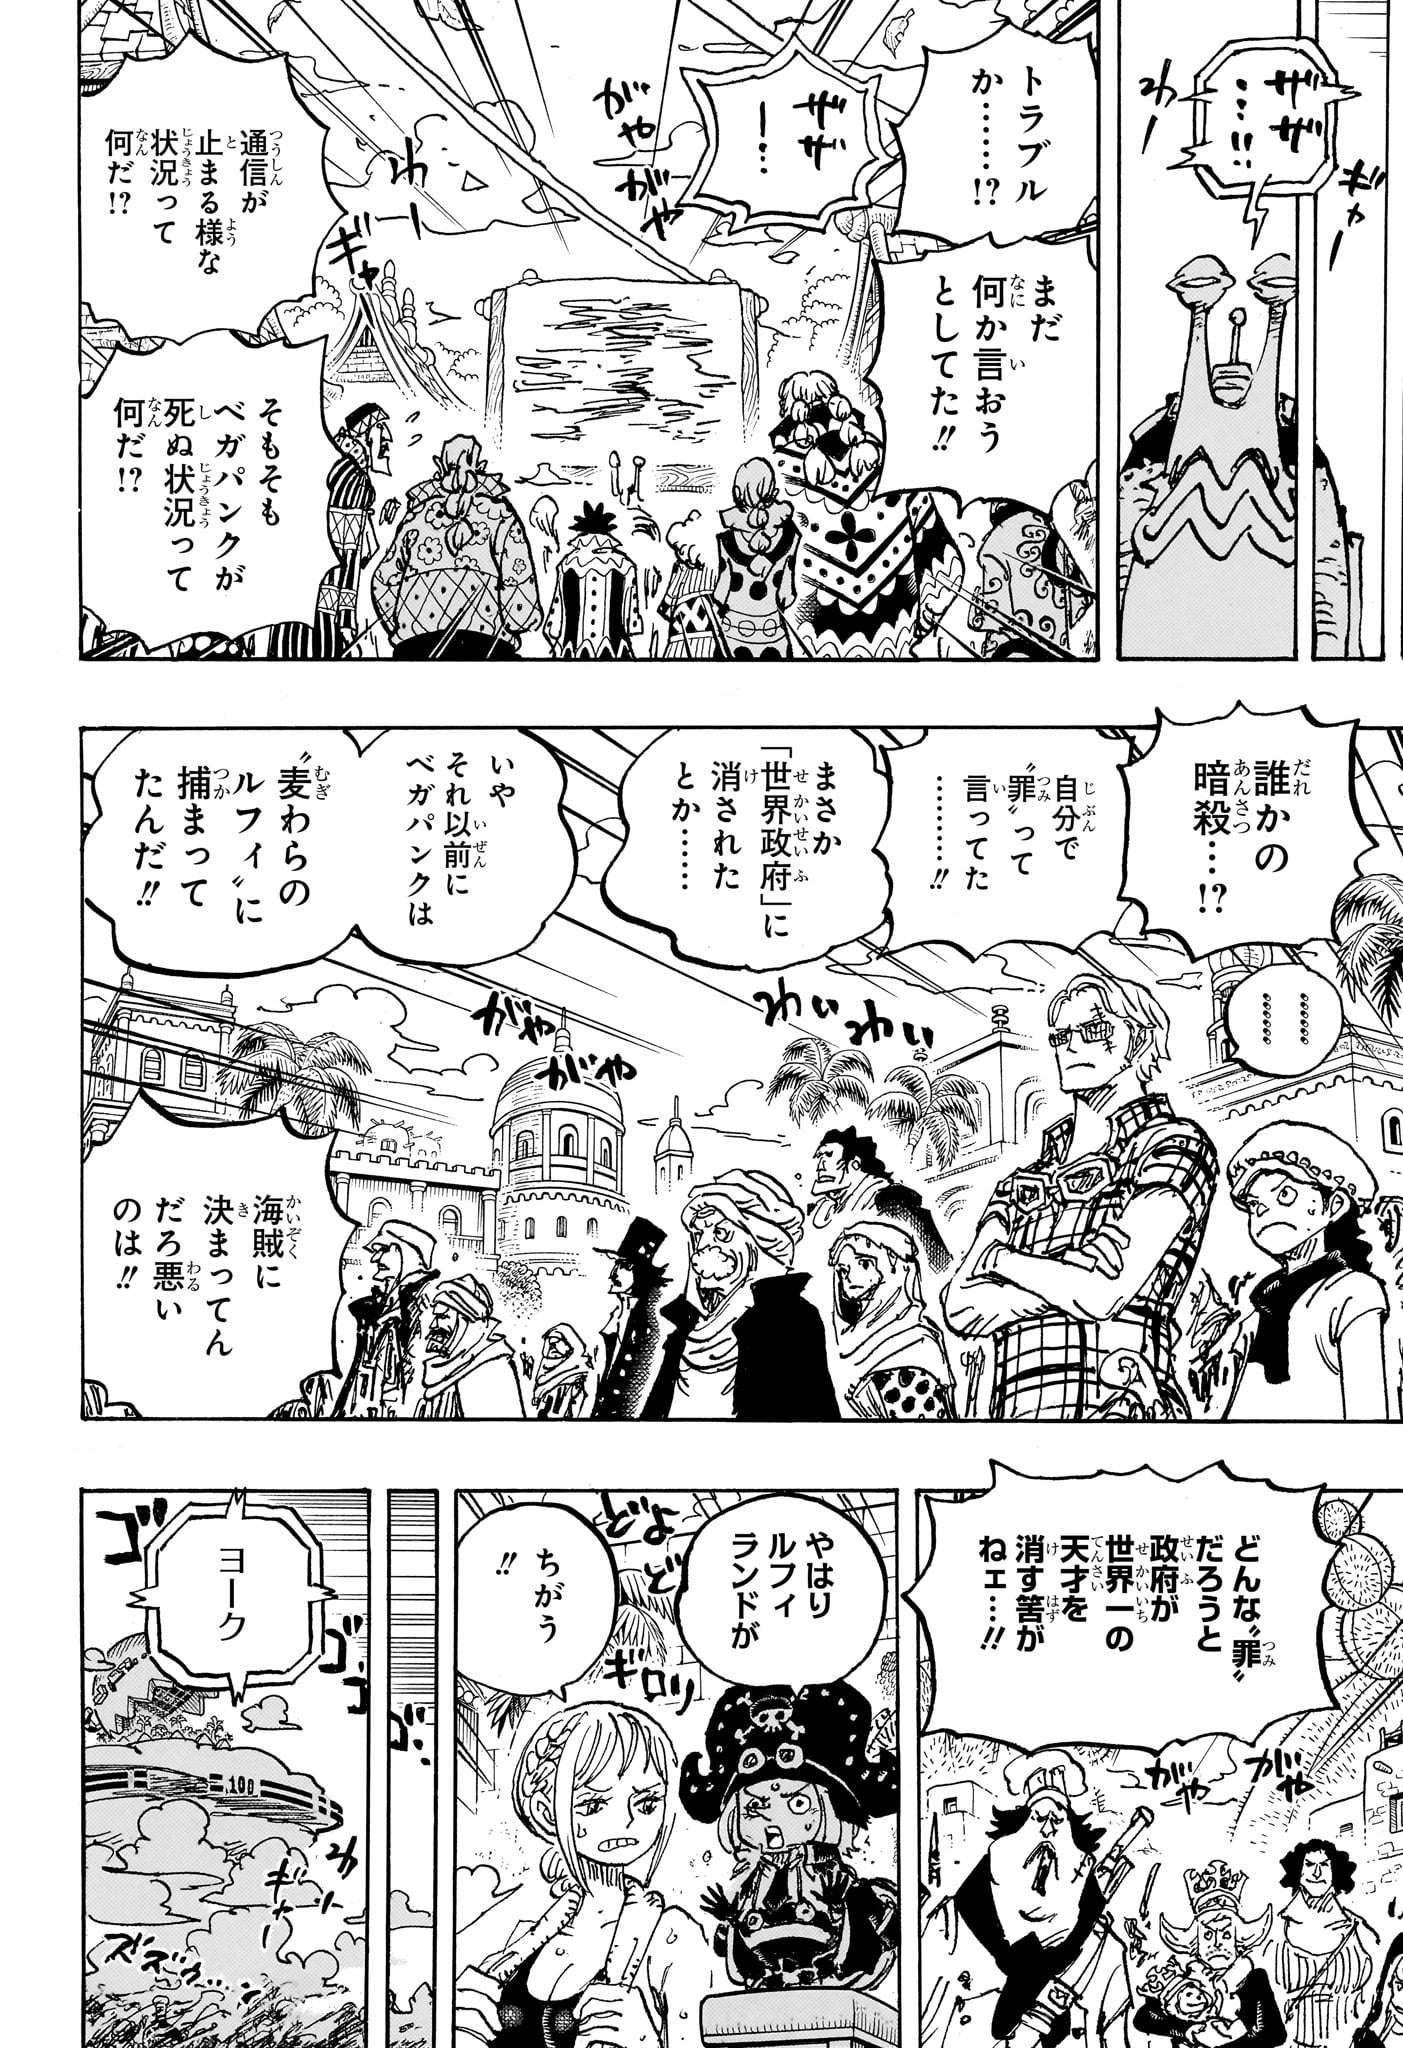 One Piece - Chapter 1118 - Page 4